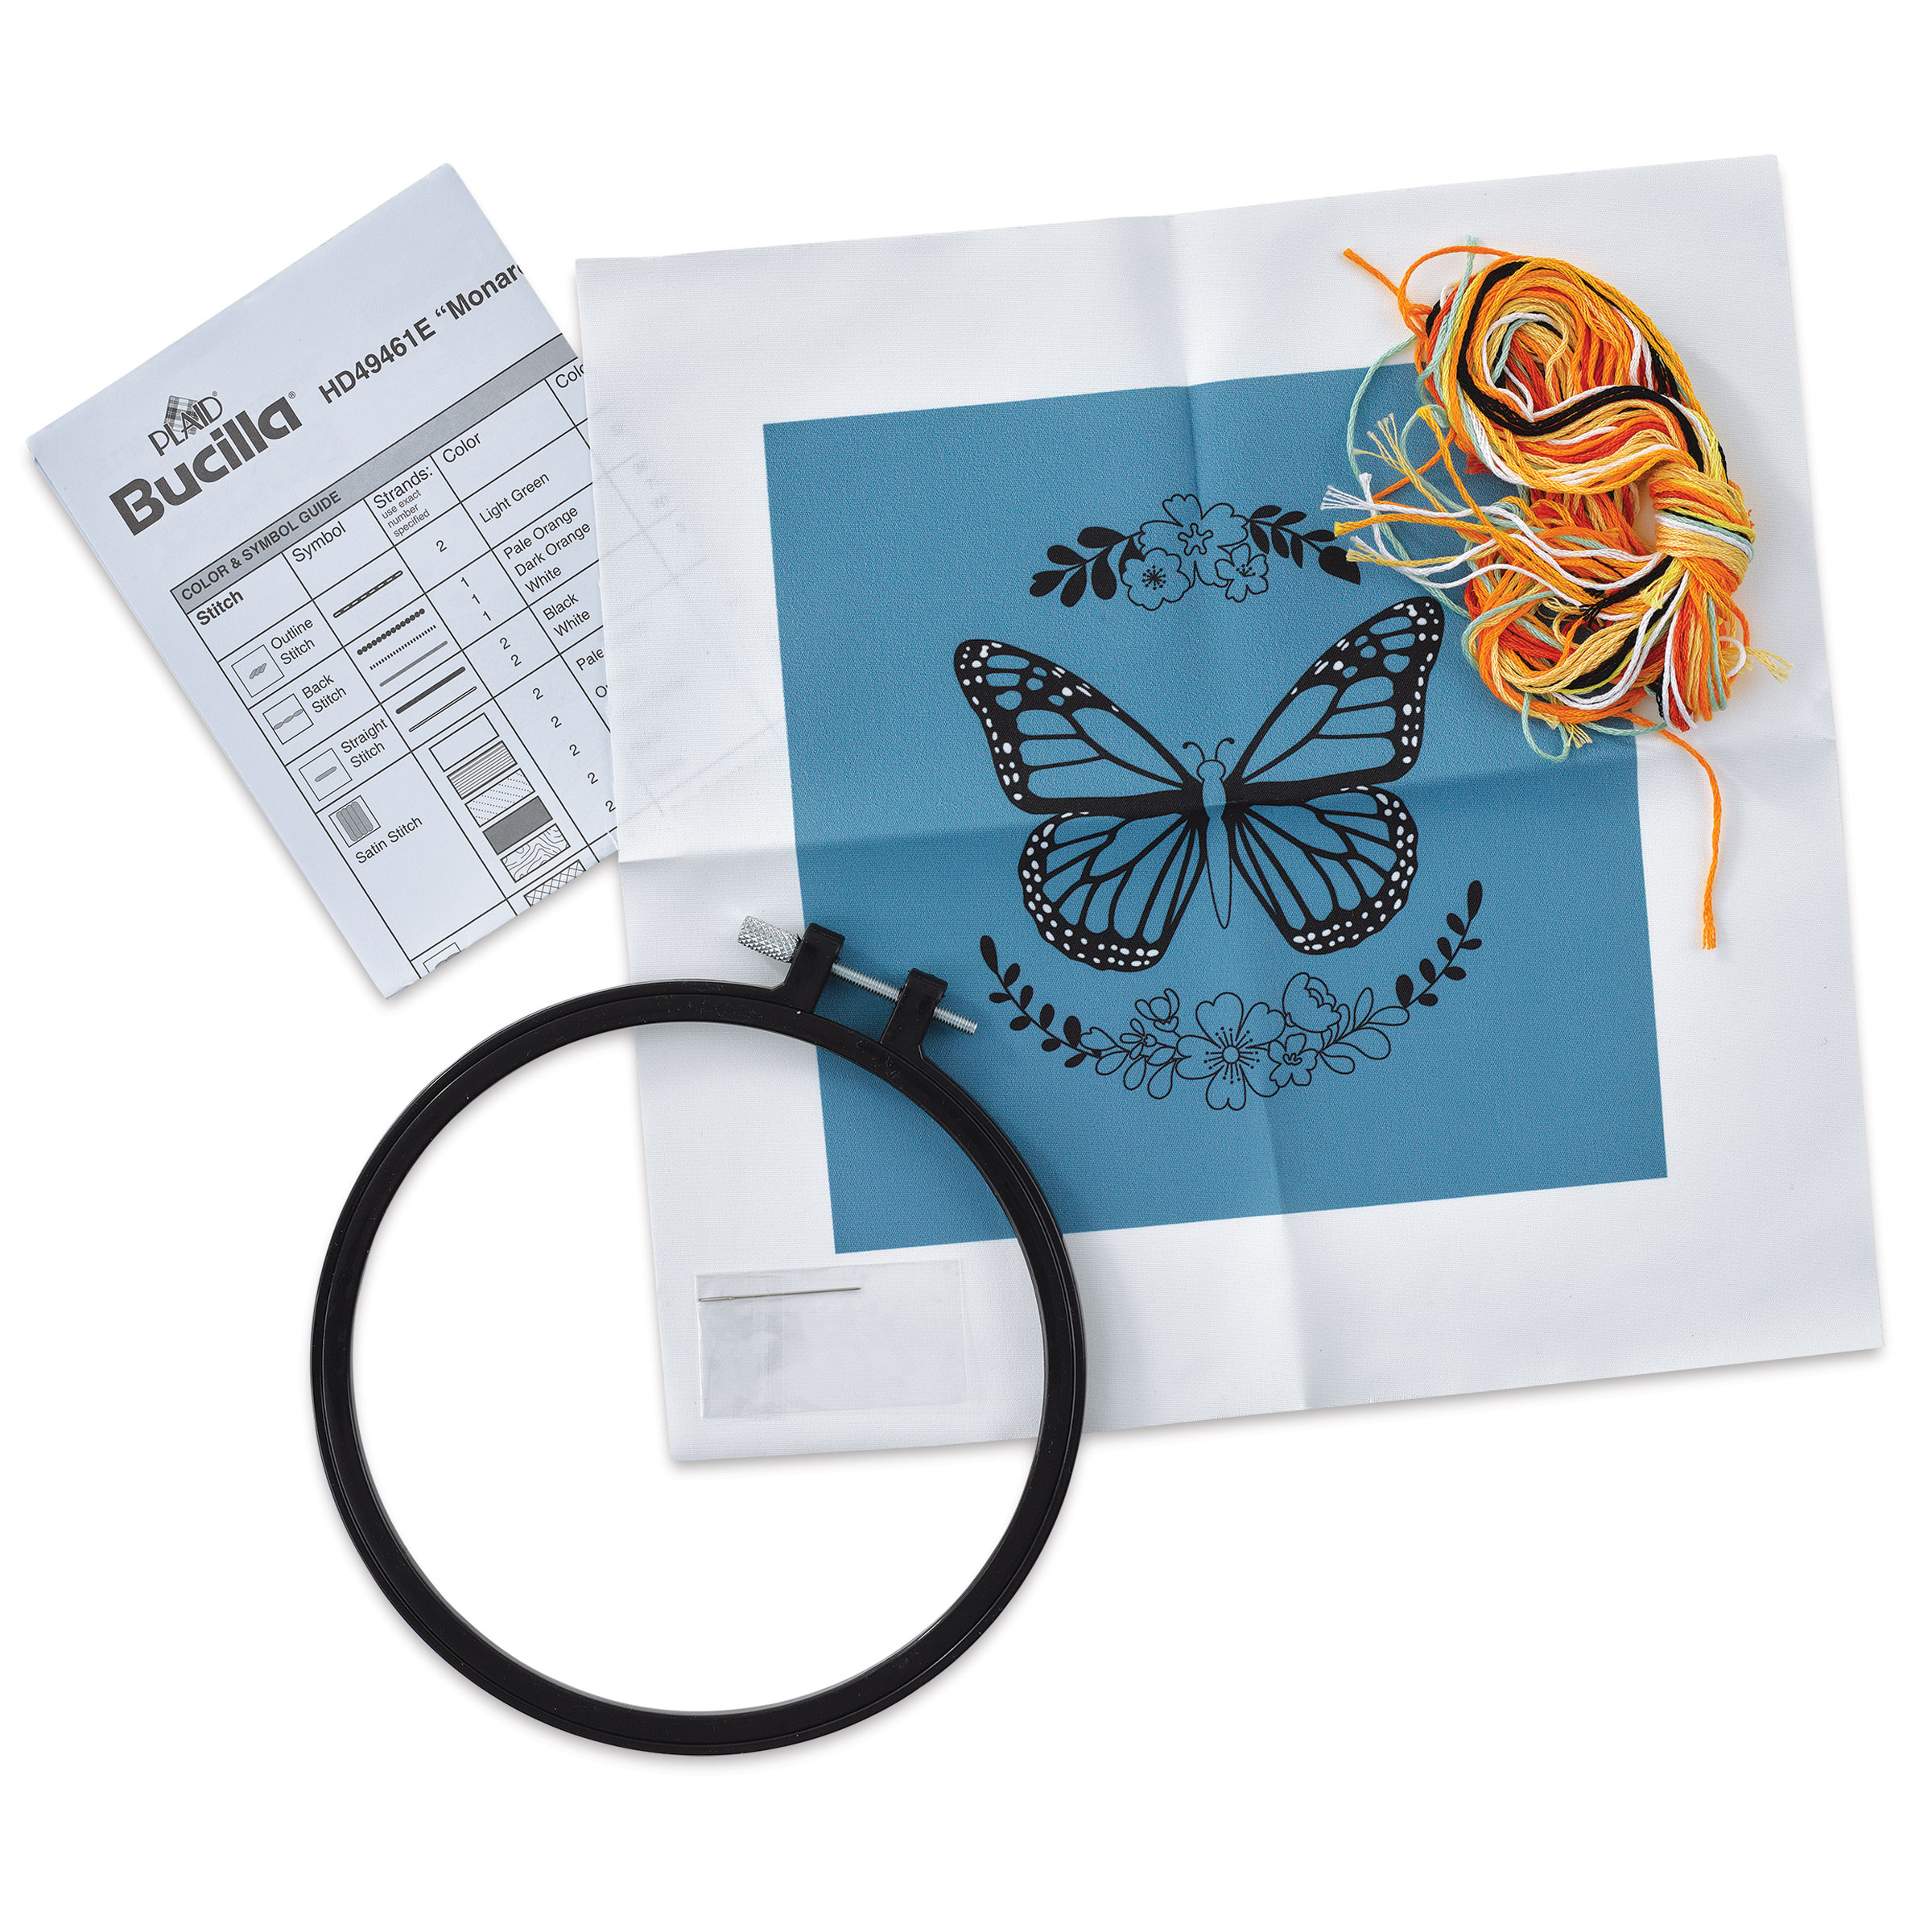 Stamped Embroidery Kit Monarch Butterfly - 046109494616